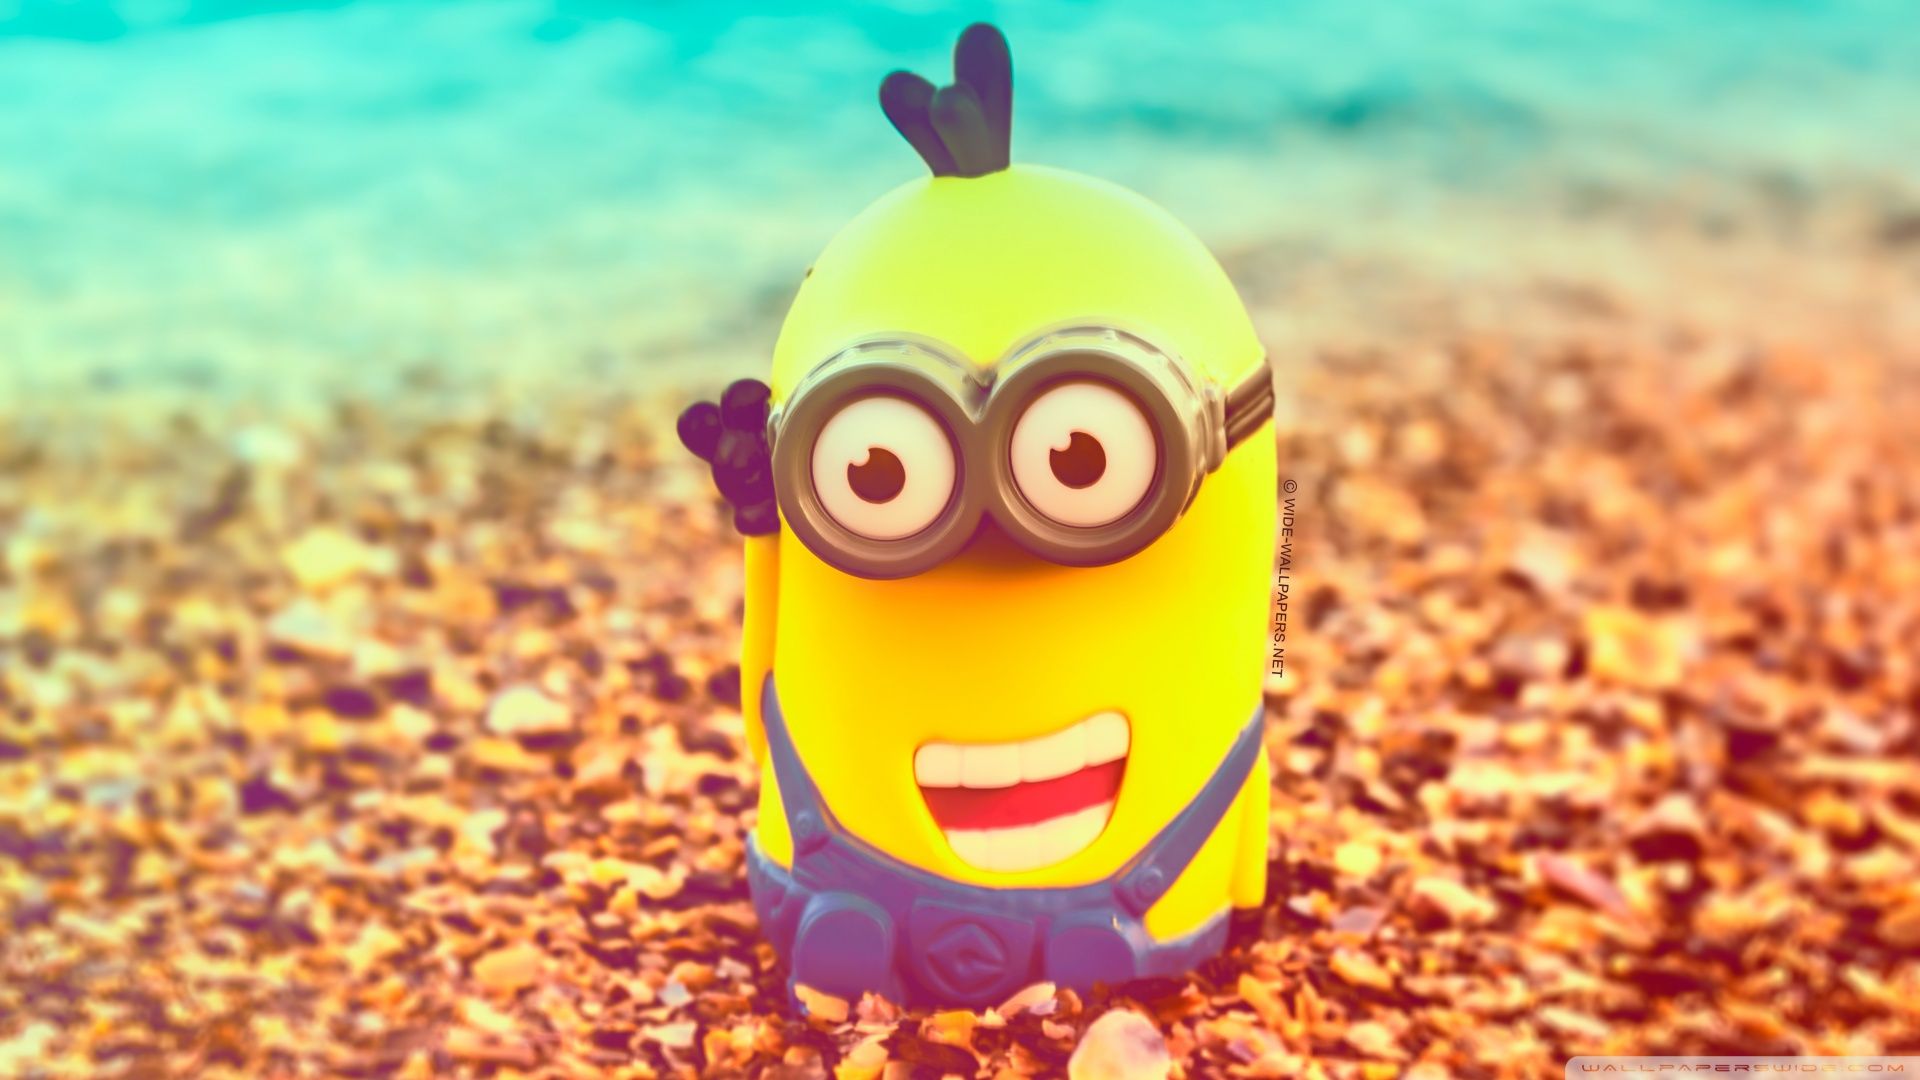 3 minions images